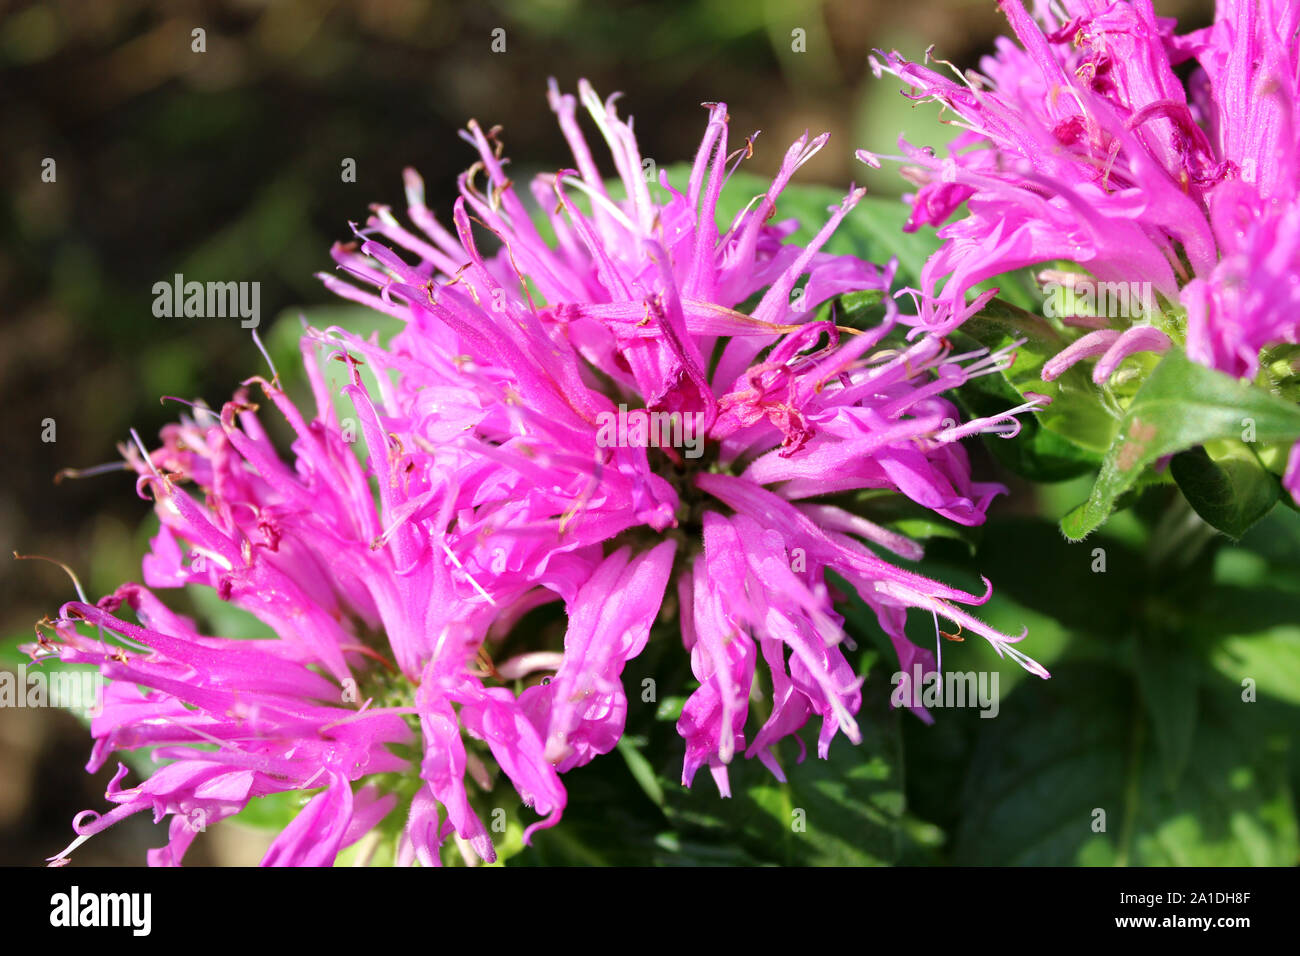 Cluster of purple blooming flowers Stock Photo